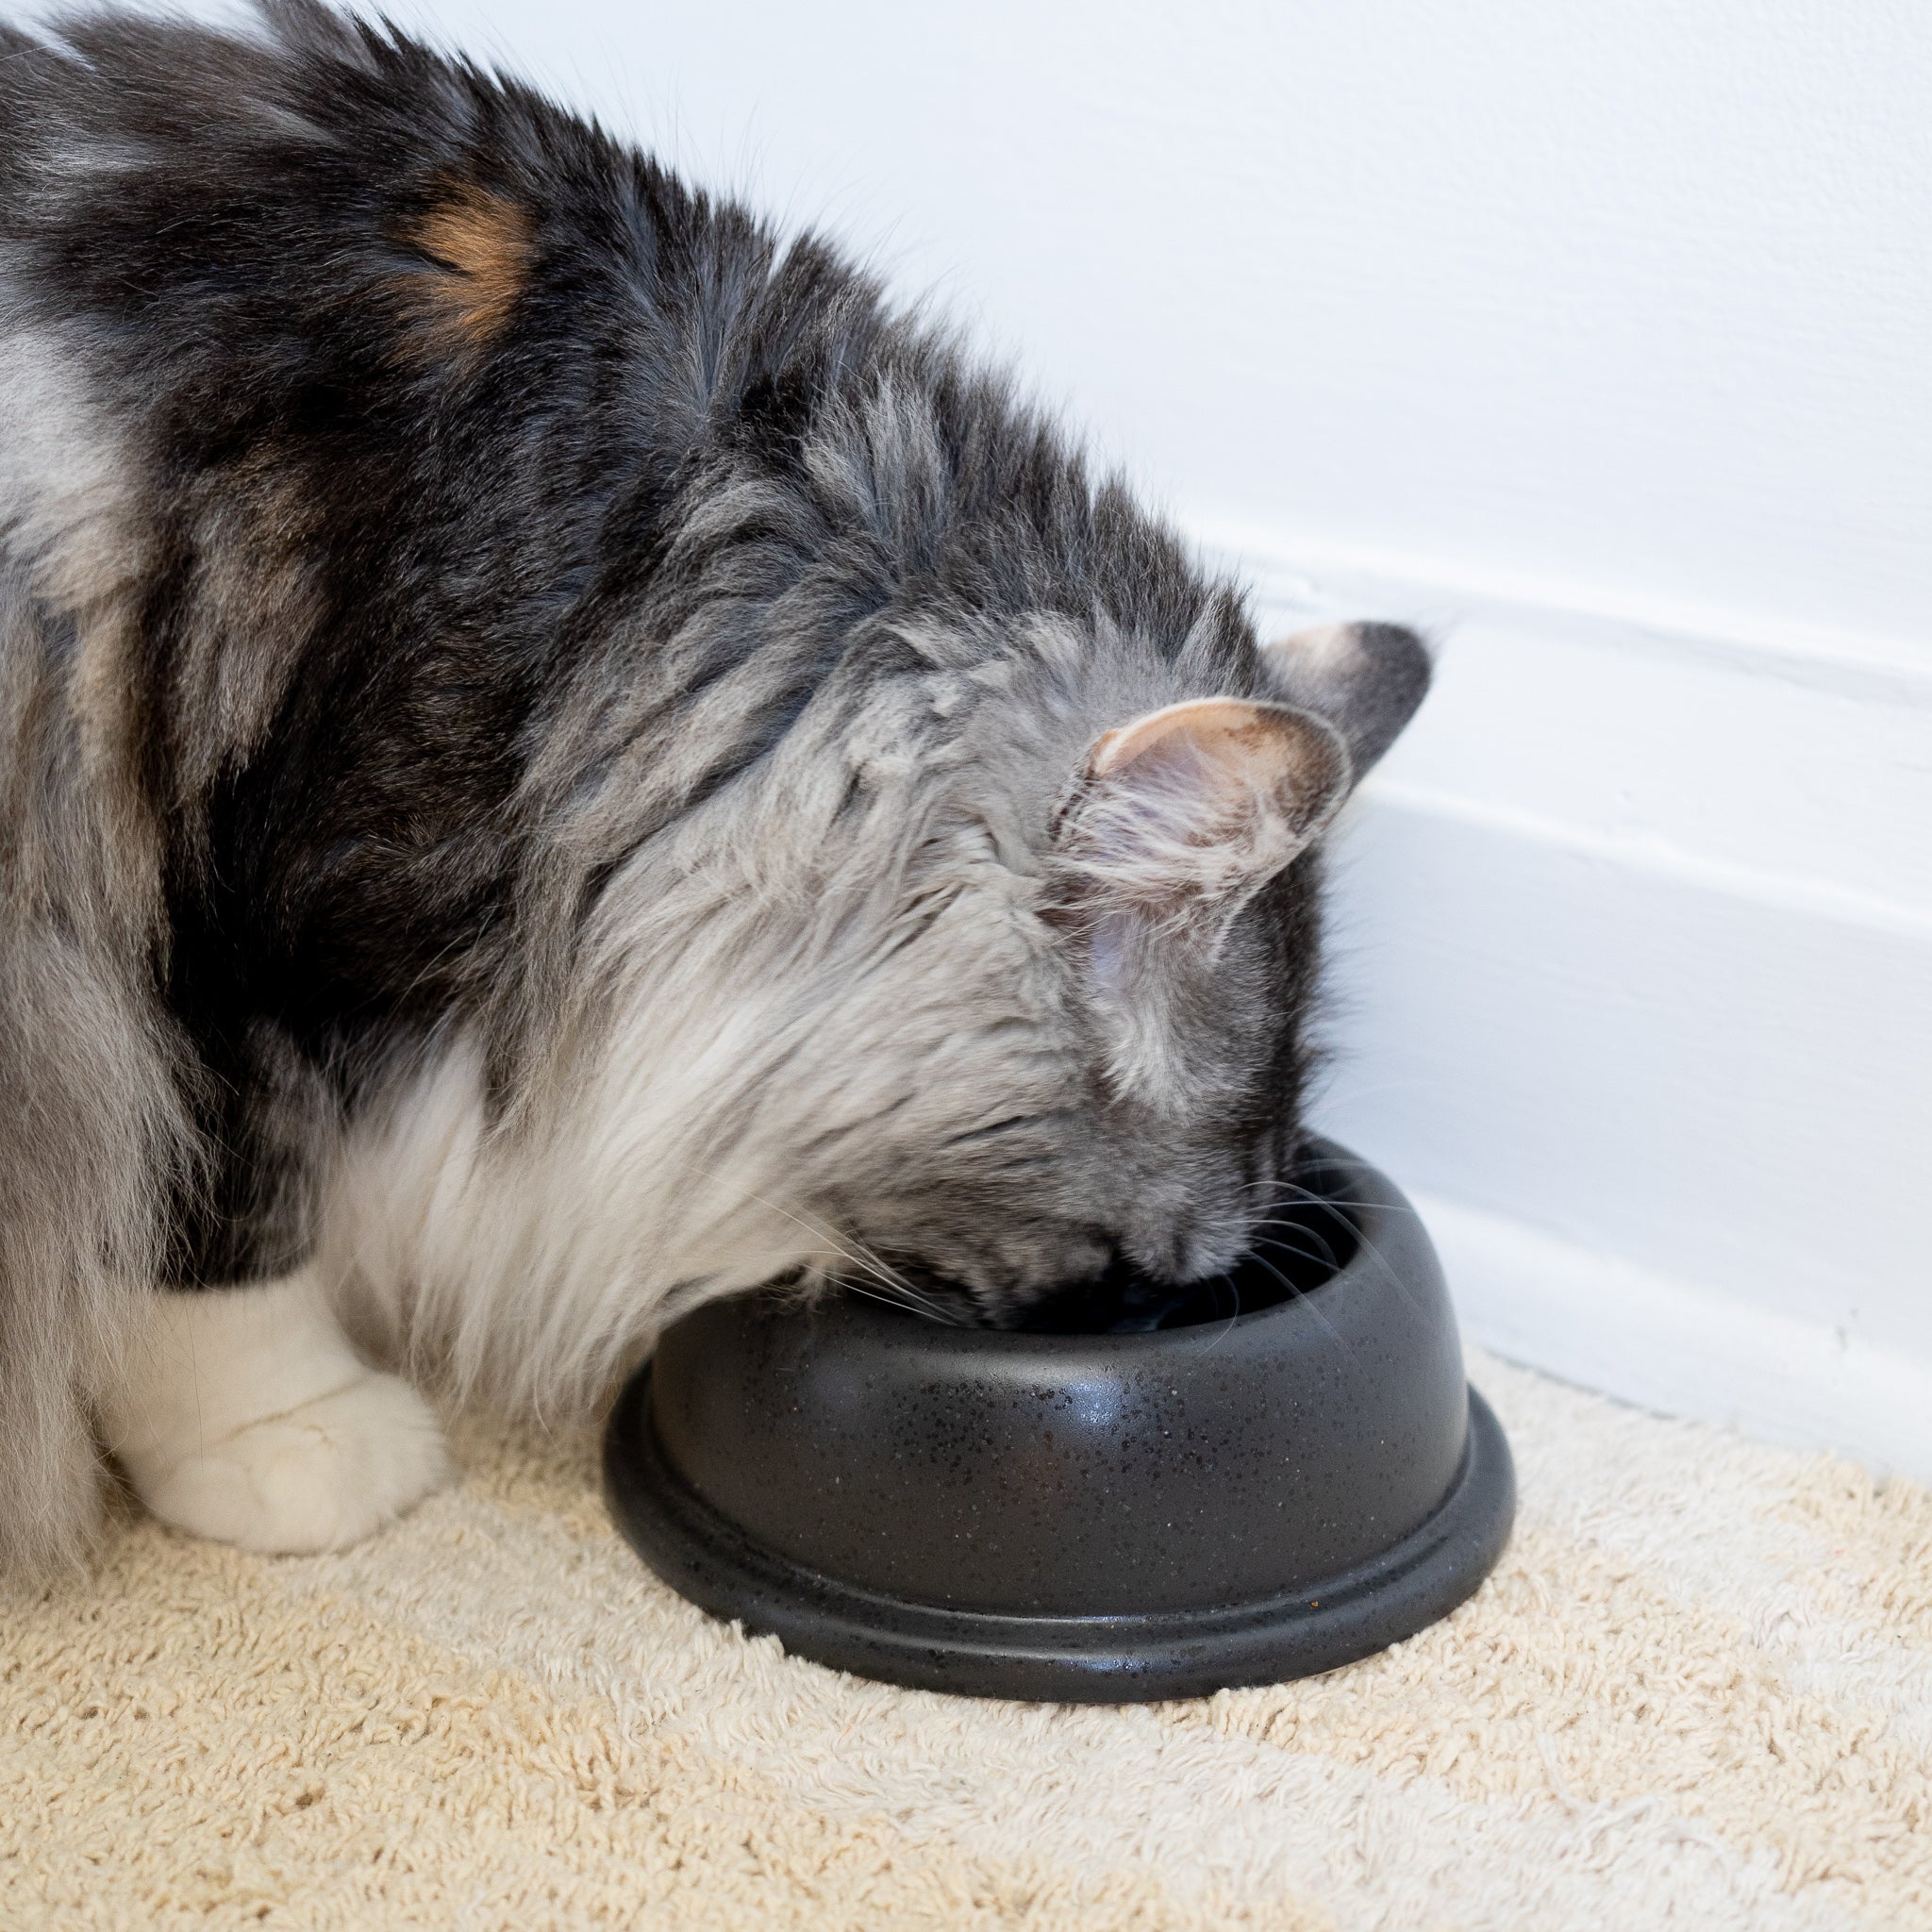 Cat drinking from ceramic hand made pet food/water bowl in seed gray